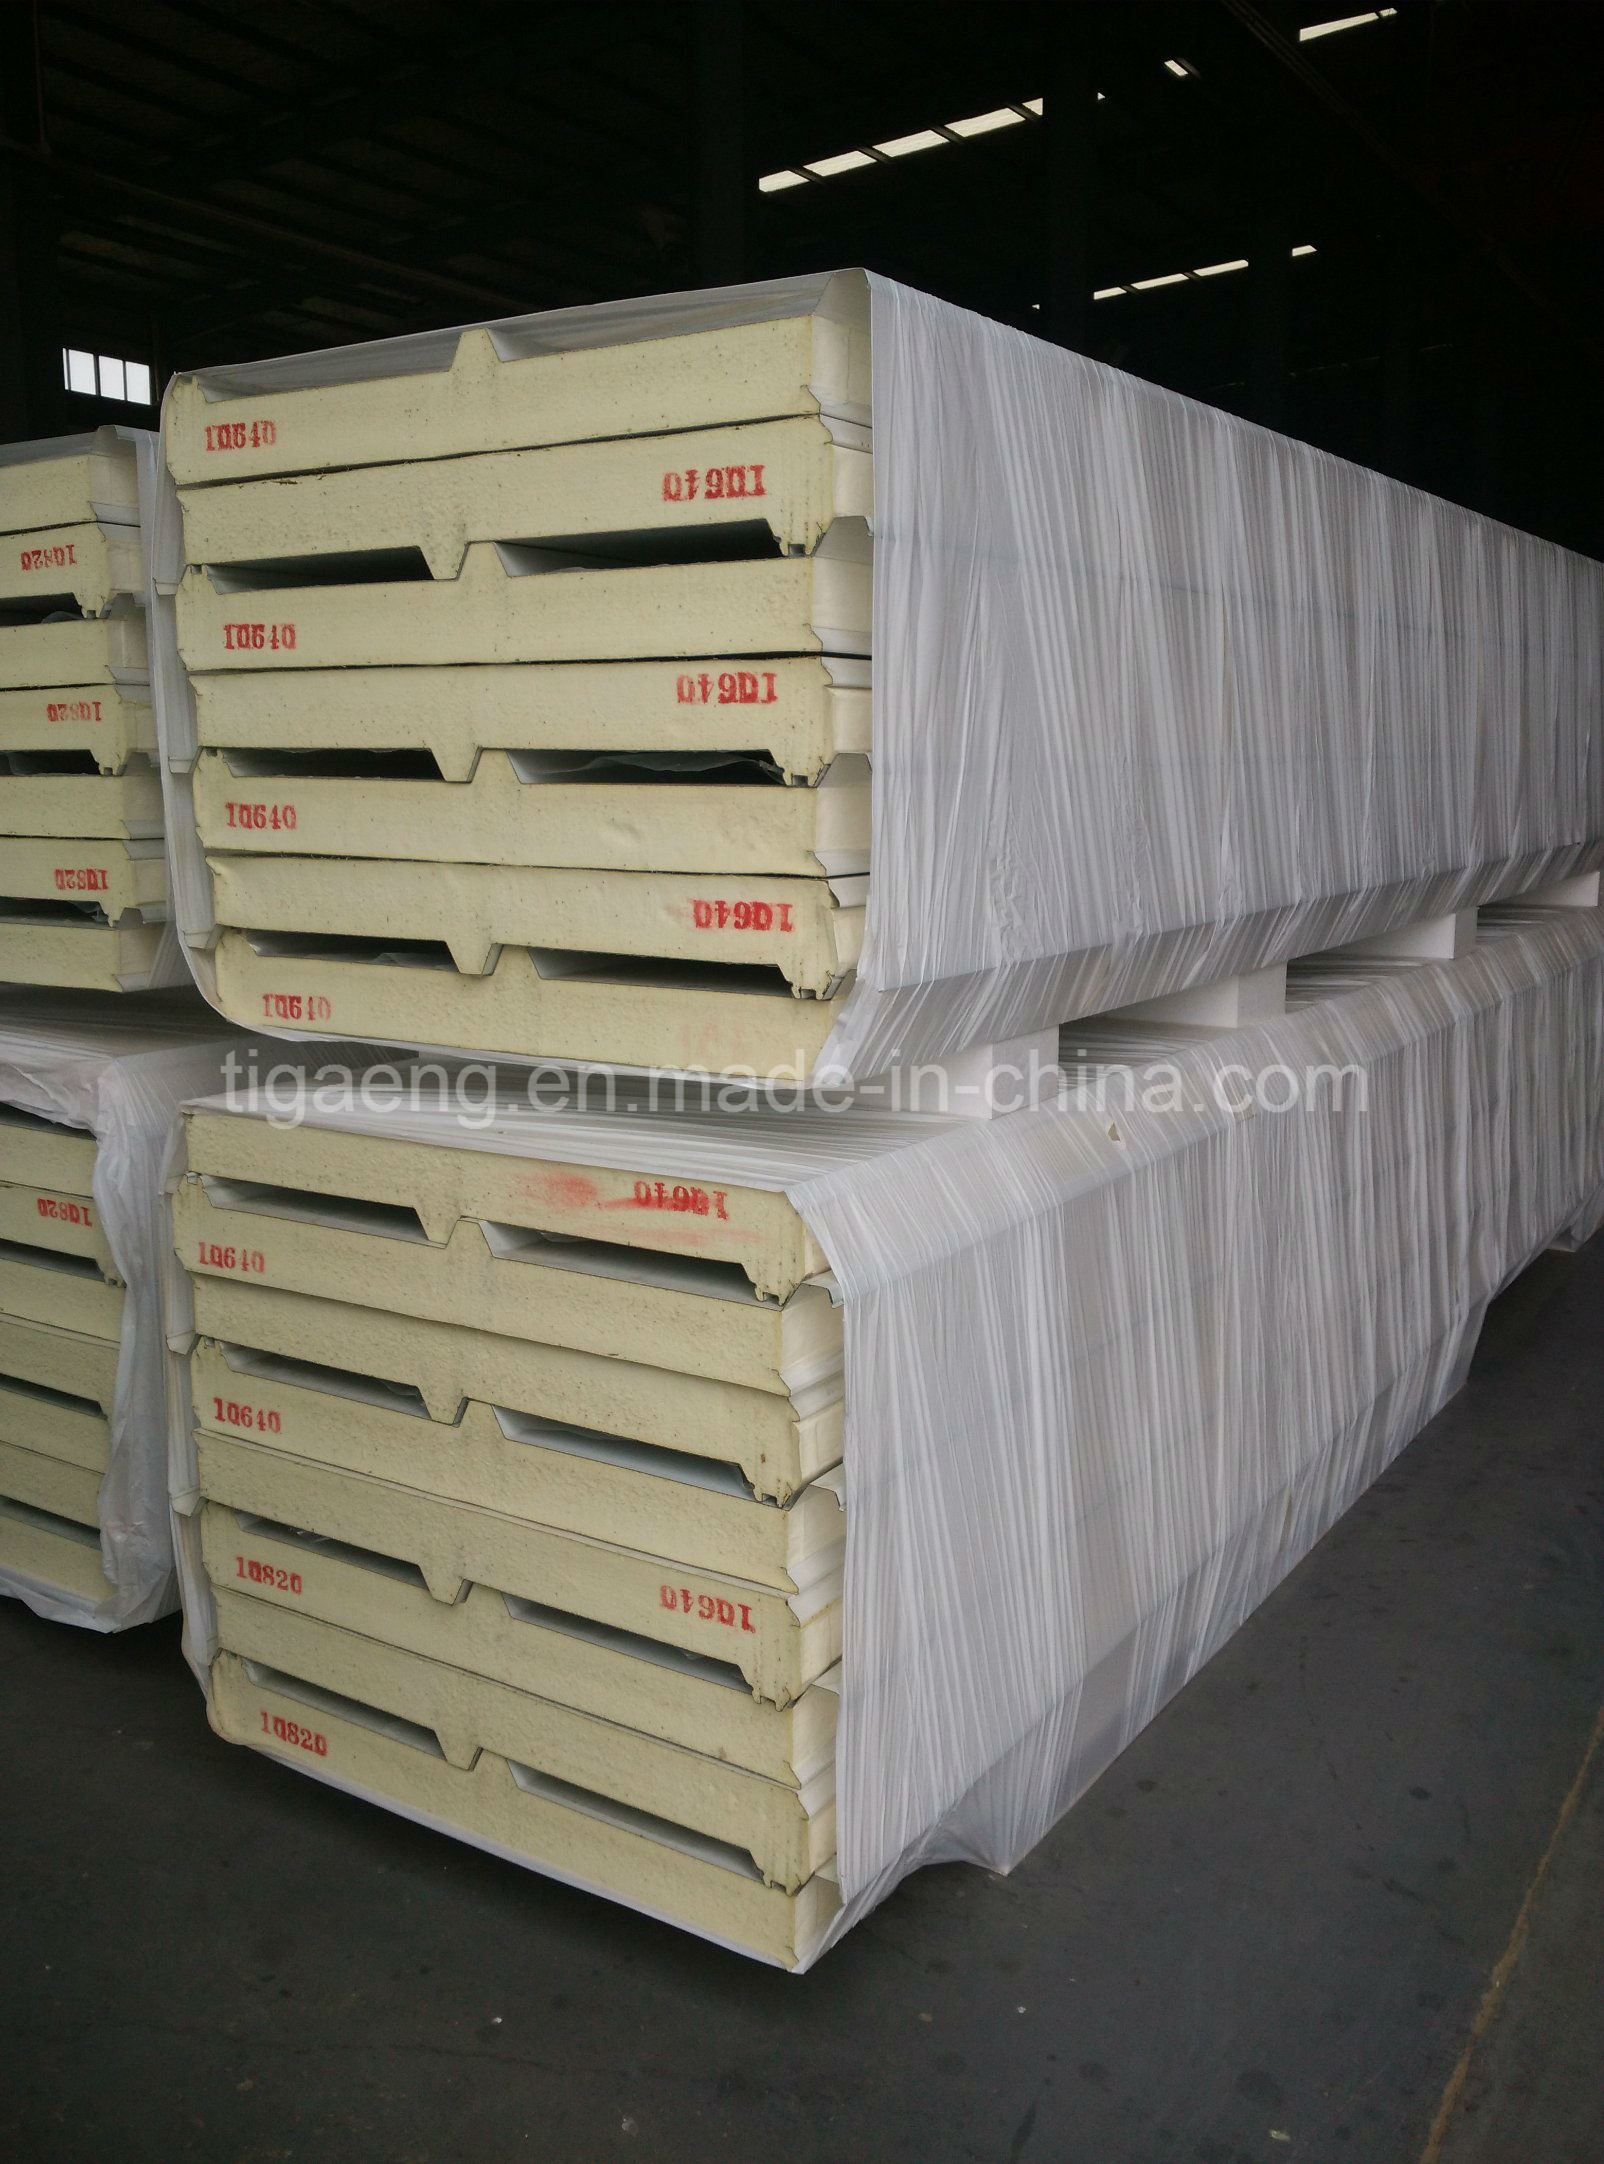 PU Polyurethane Insulated Sandwich Wall Panel/Roof Panel with Factory Price